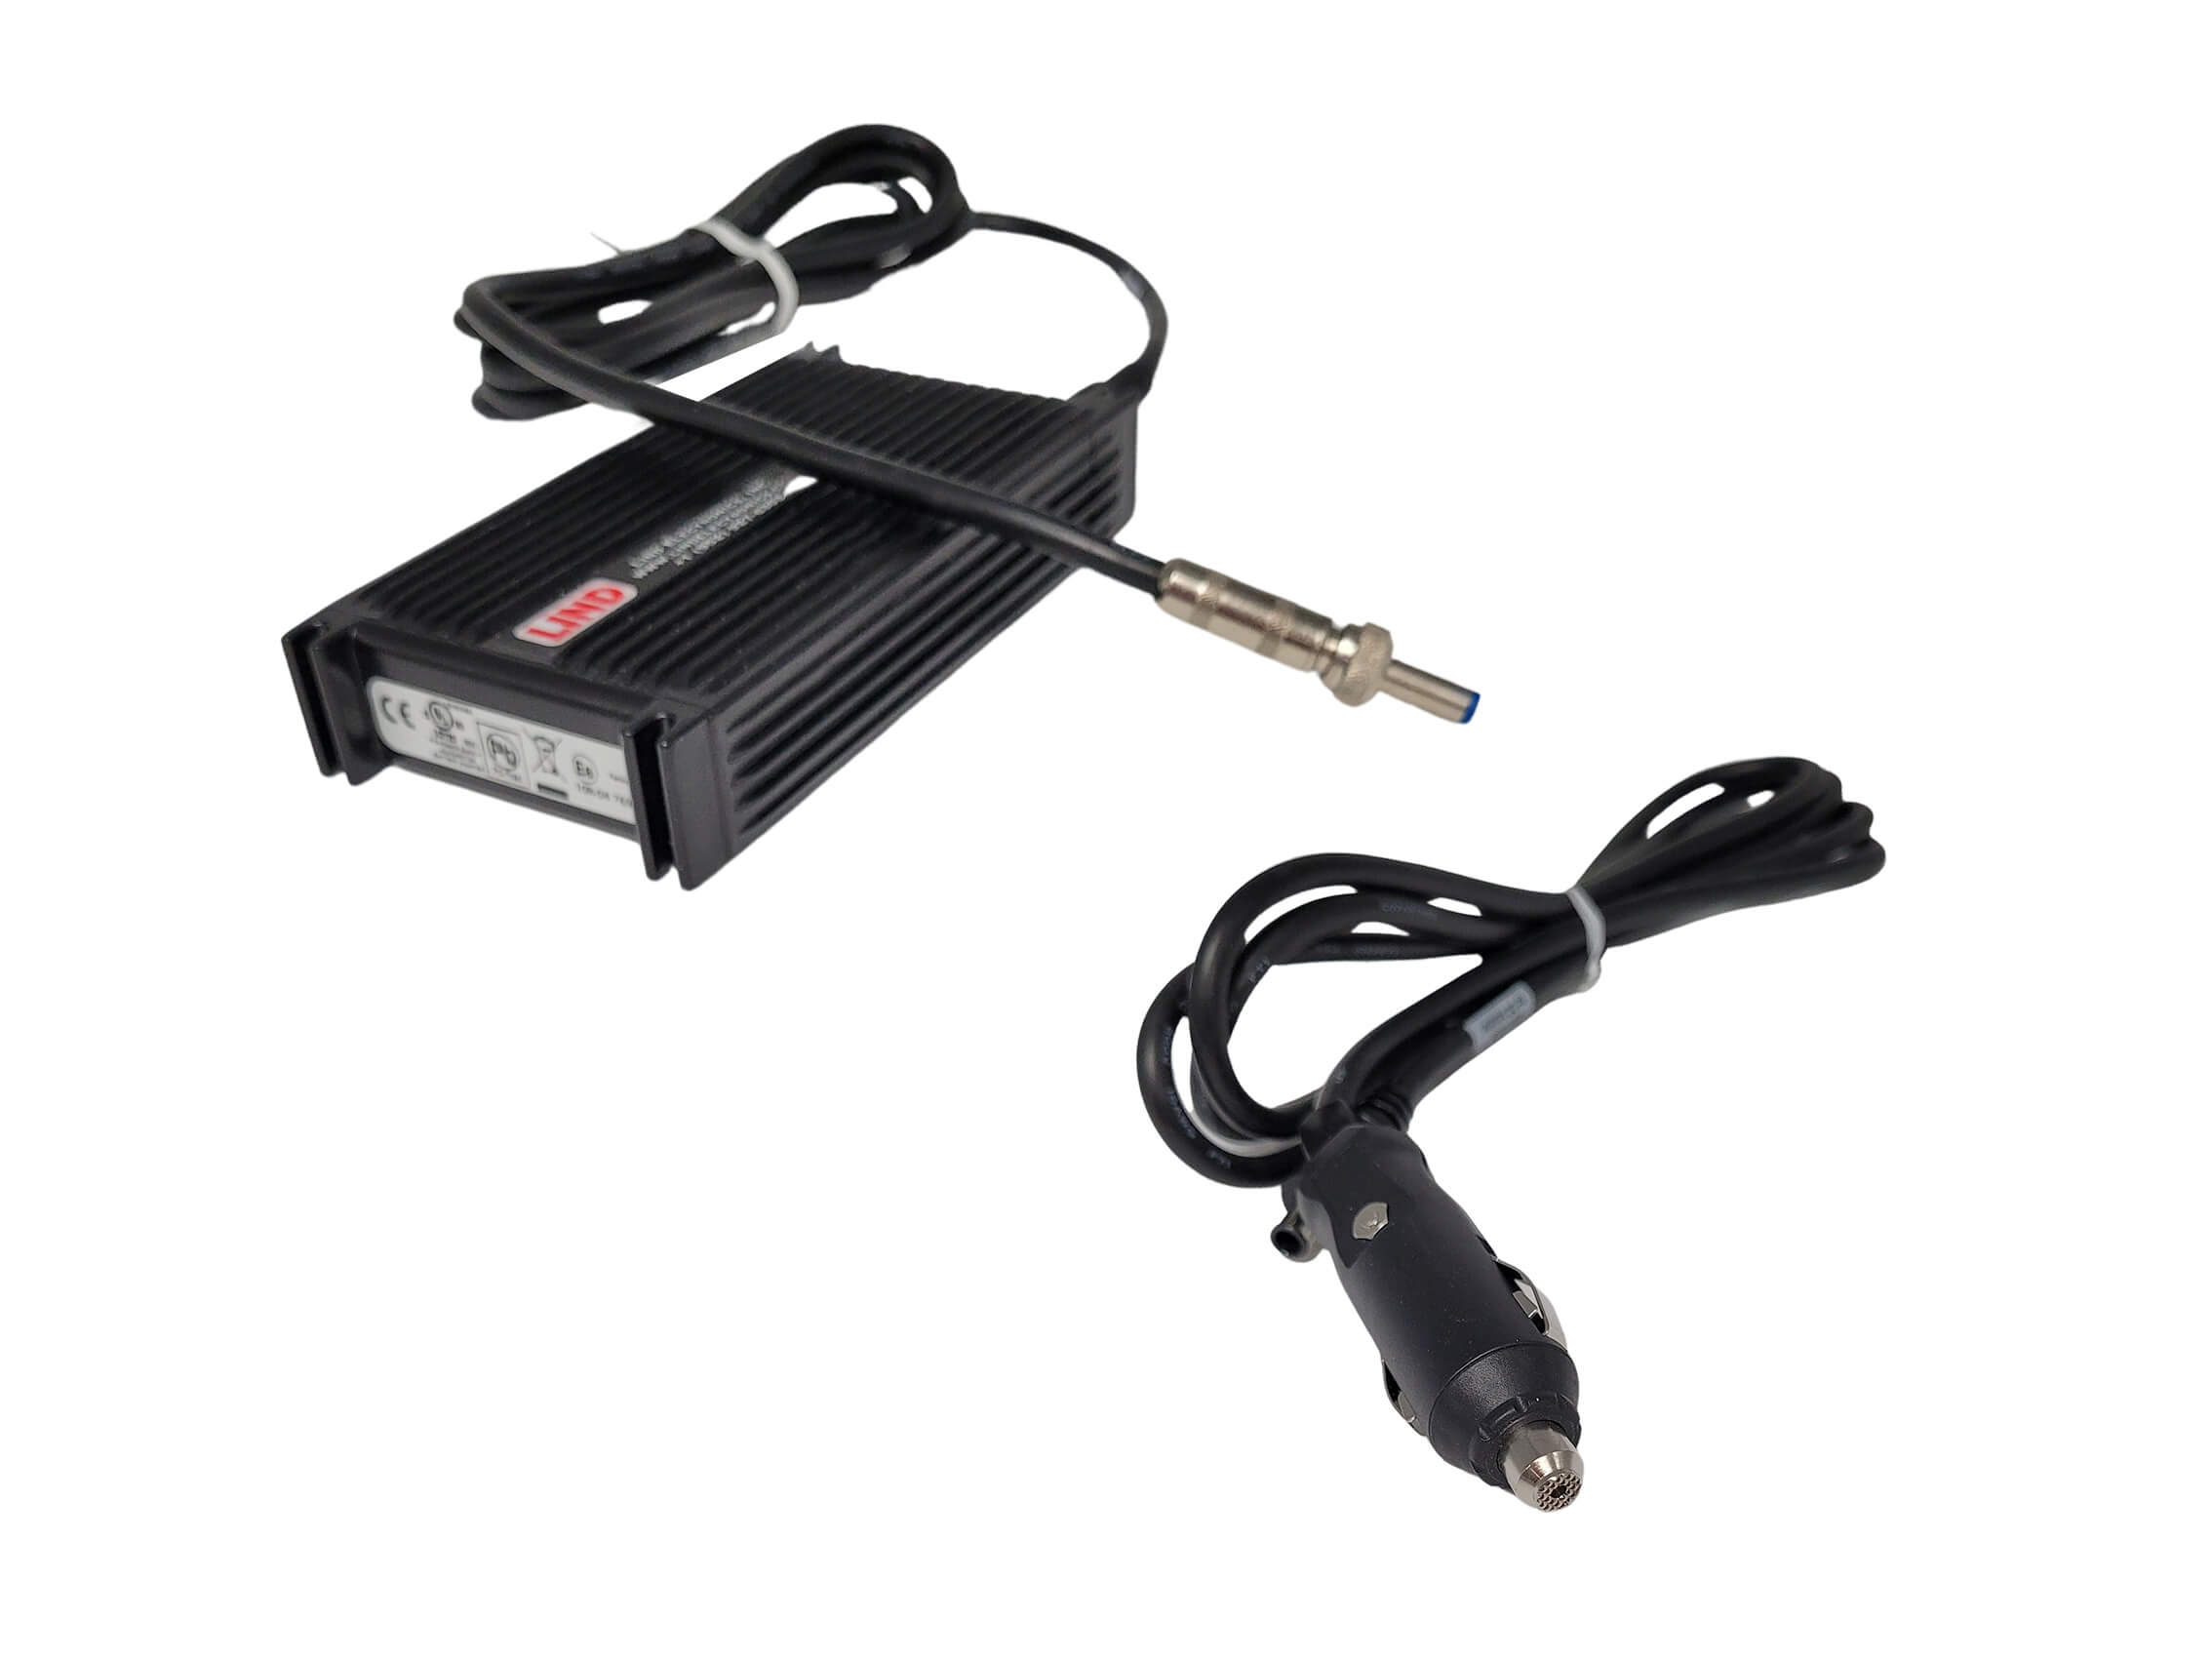 Power Supply with Switchcraft Connector for DS-DELL-904 & 904-4, and DS-DELL-907 & 907-4 Docking Stations